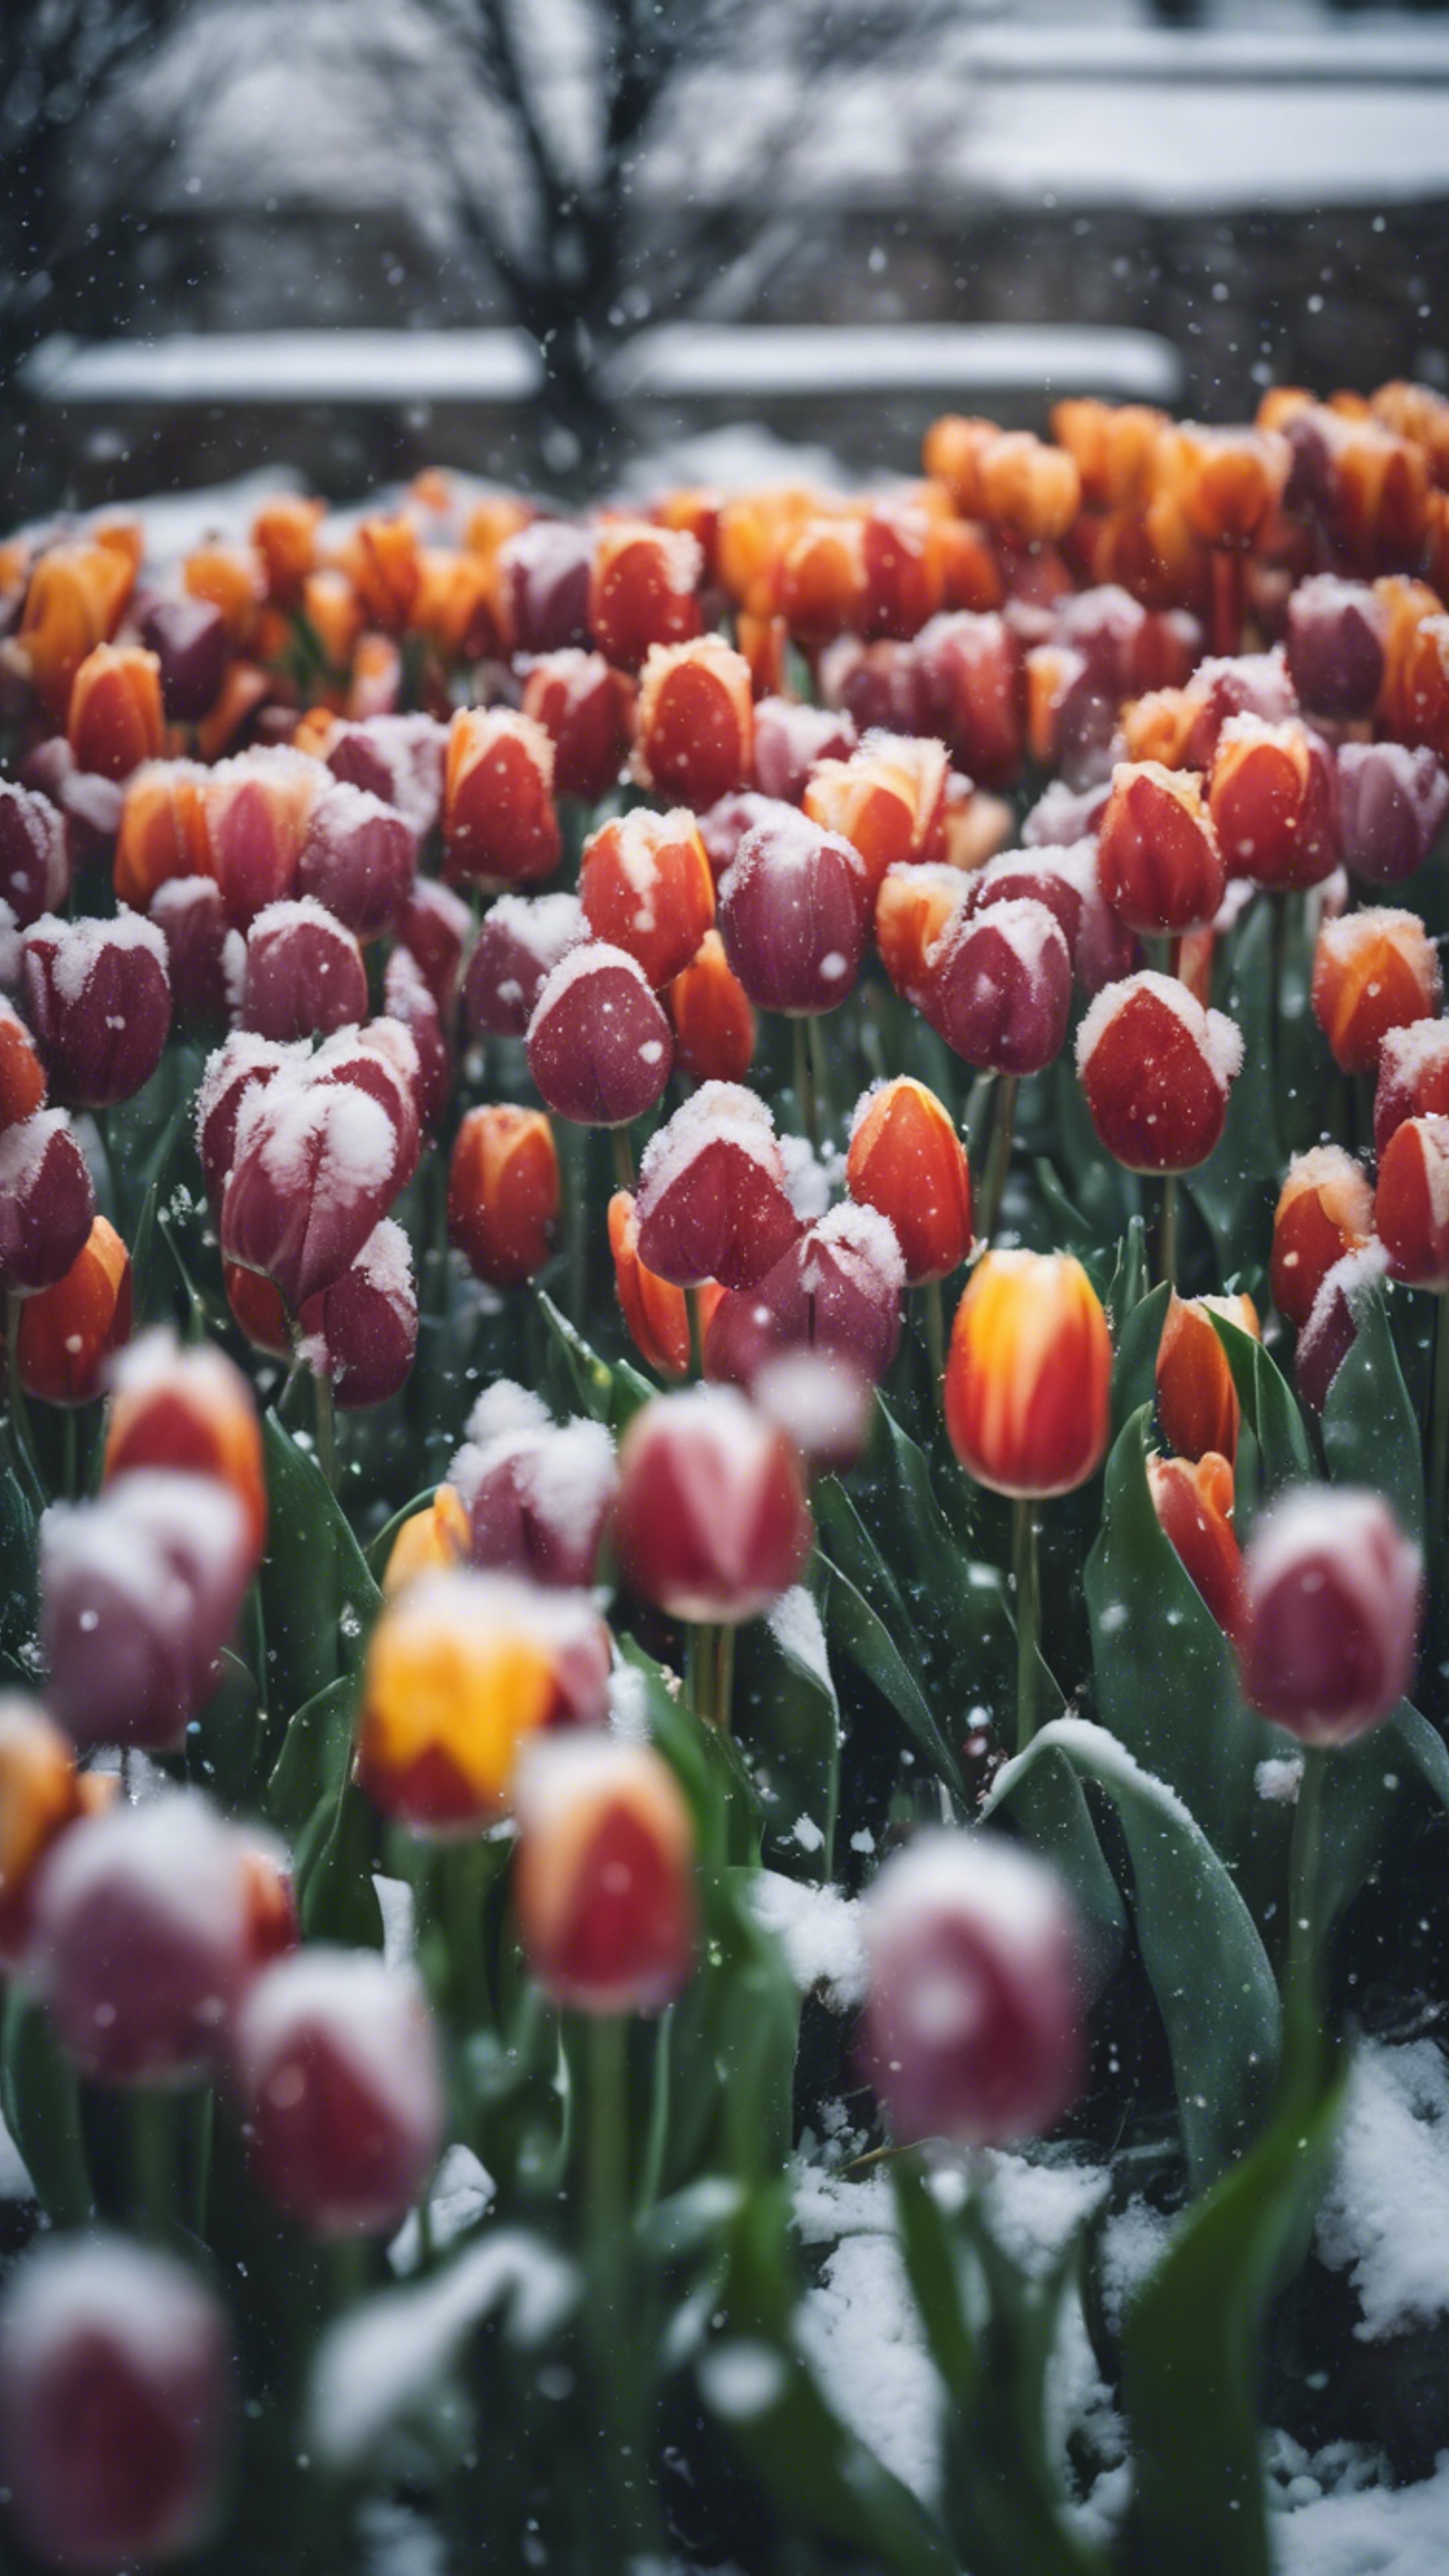 A patch of colorful tulips partially covered by a late spring snowfall.壁紙[bcf7f5ed51ad49e88f7f]